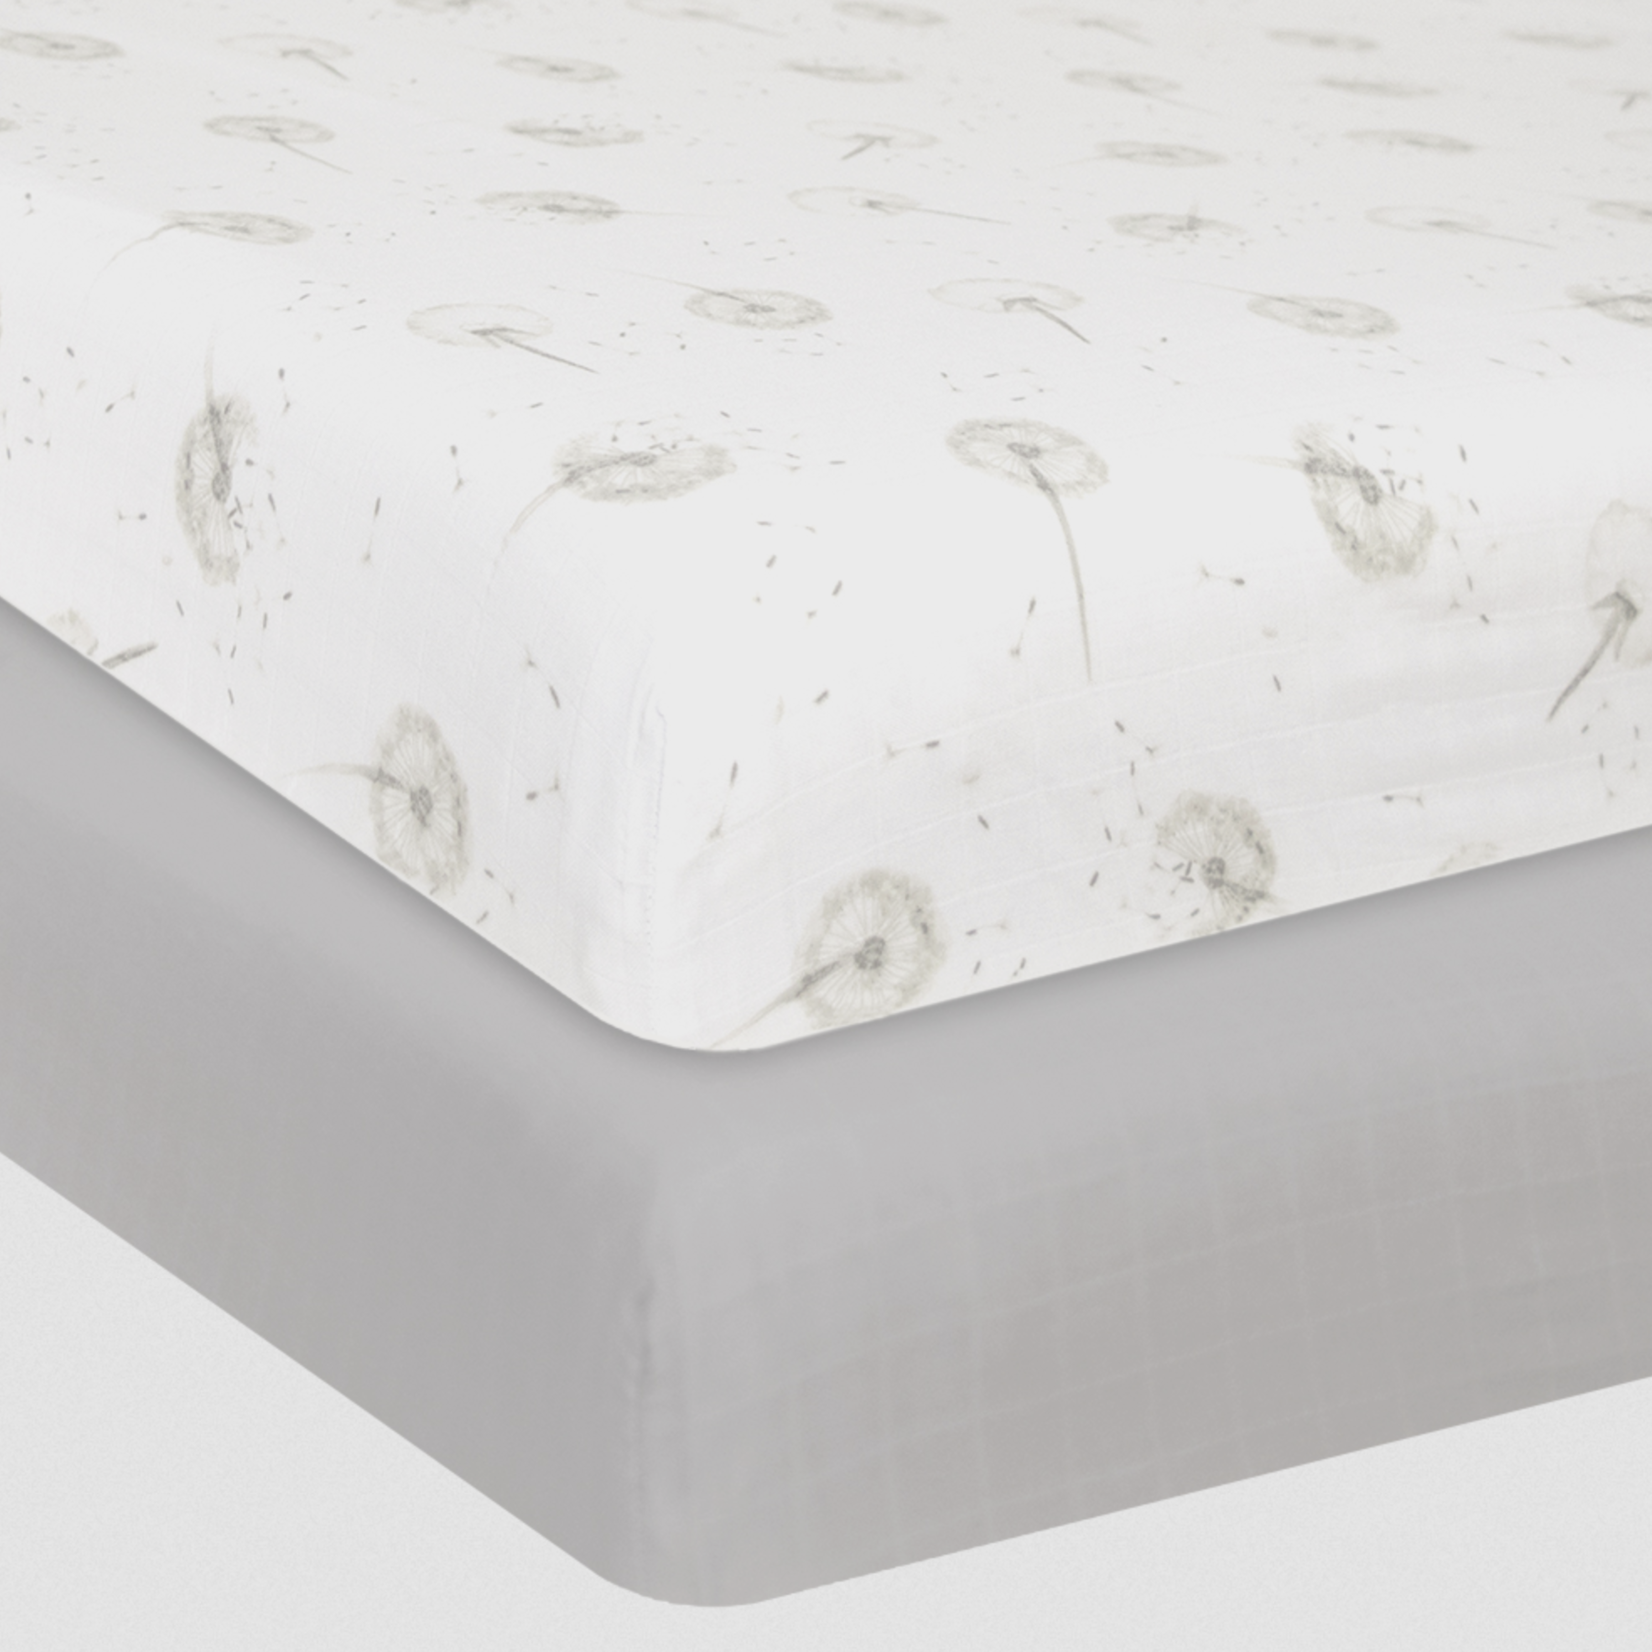 Living Textiles ORGANIC MUSLIN 2-PACK COT FITTED SHEETS DANDELION GREY